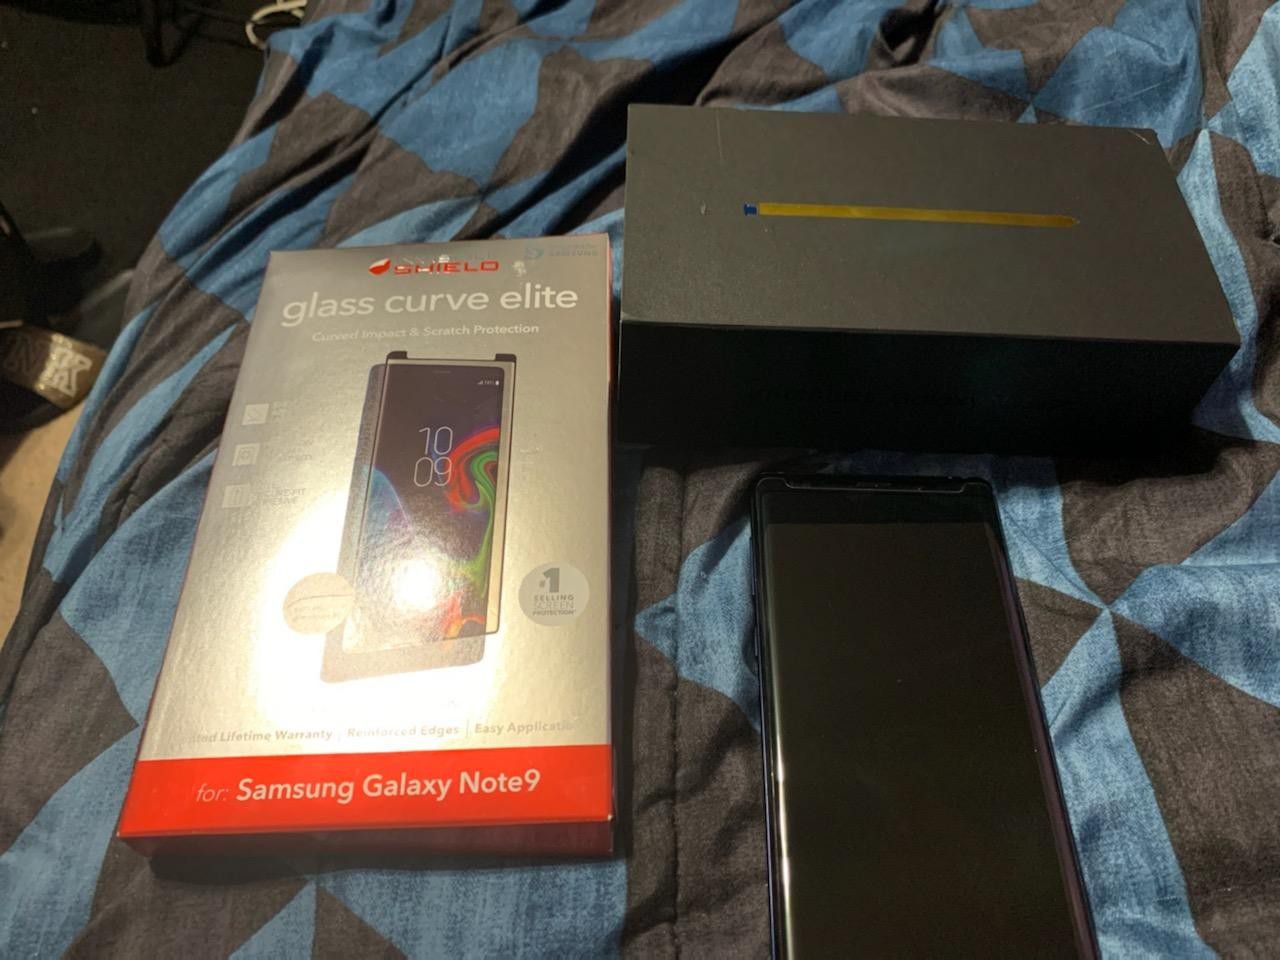 Like new Samsung Note 9!!! Only 4 months old like new for $700.00. Thanks